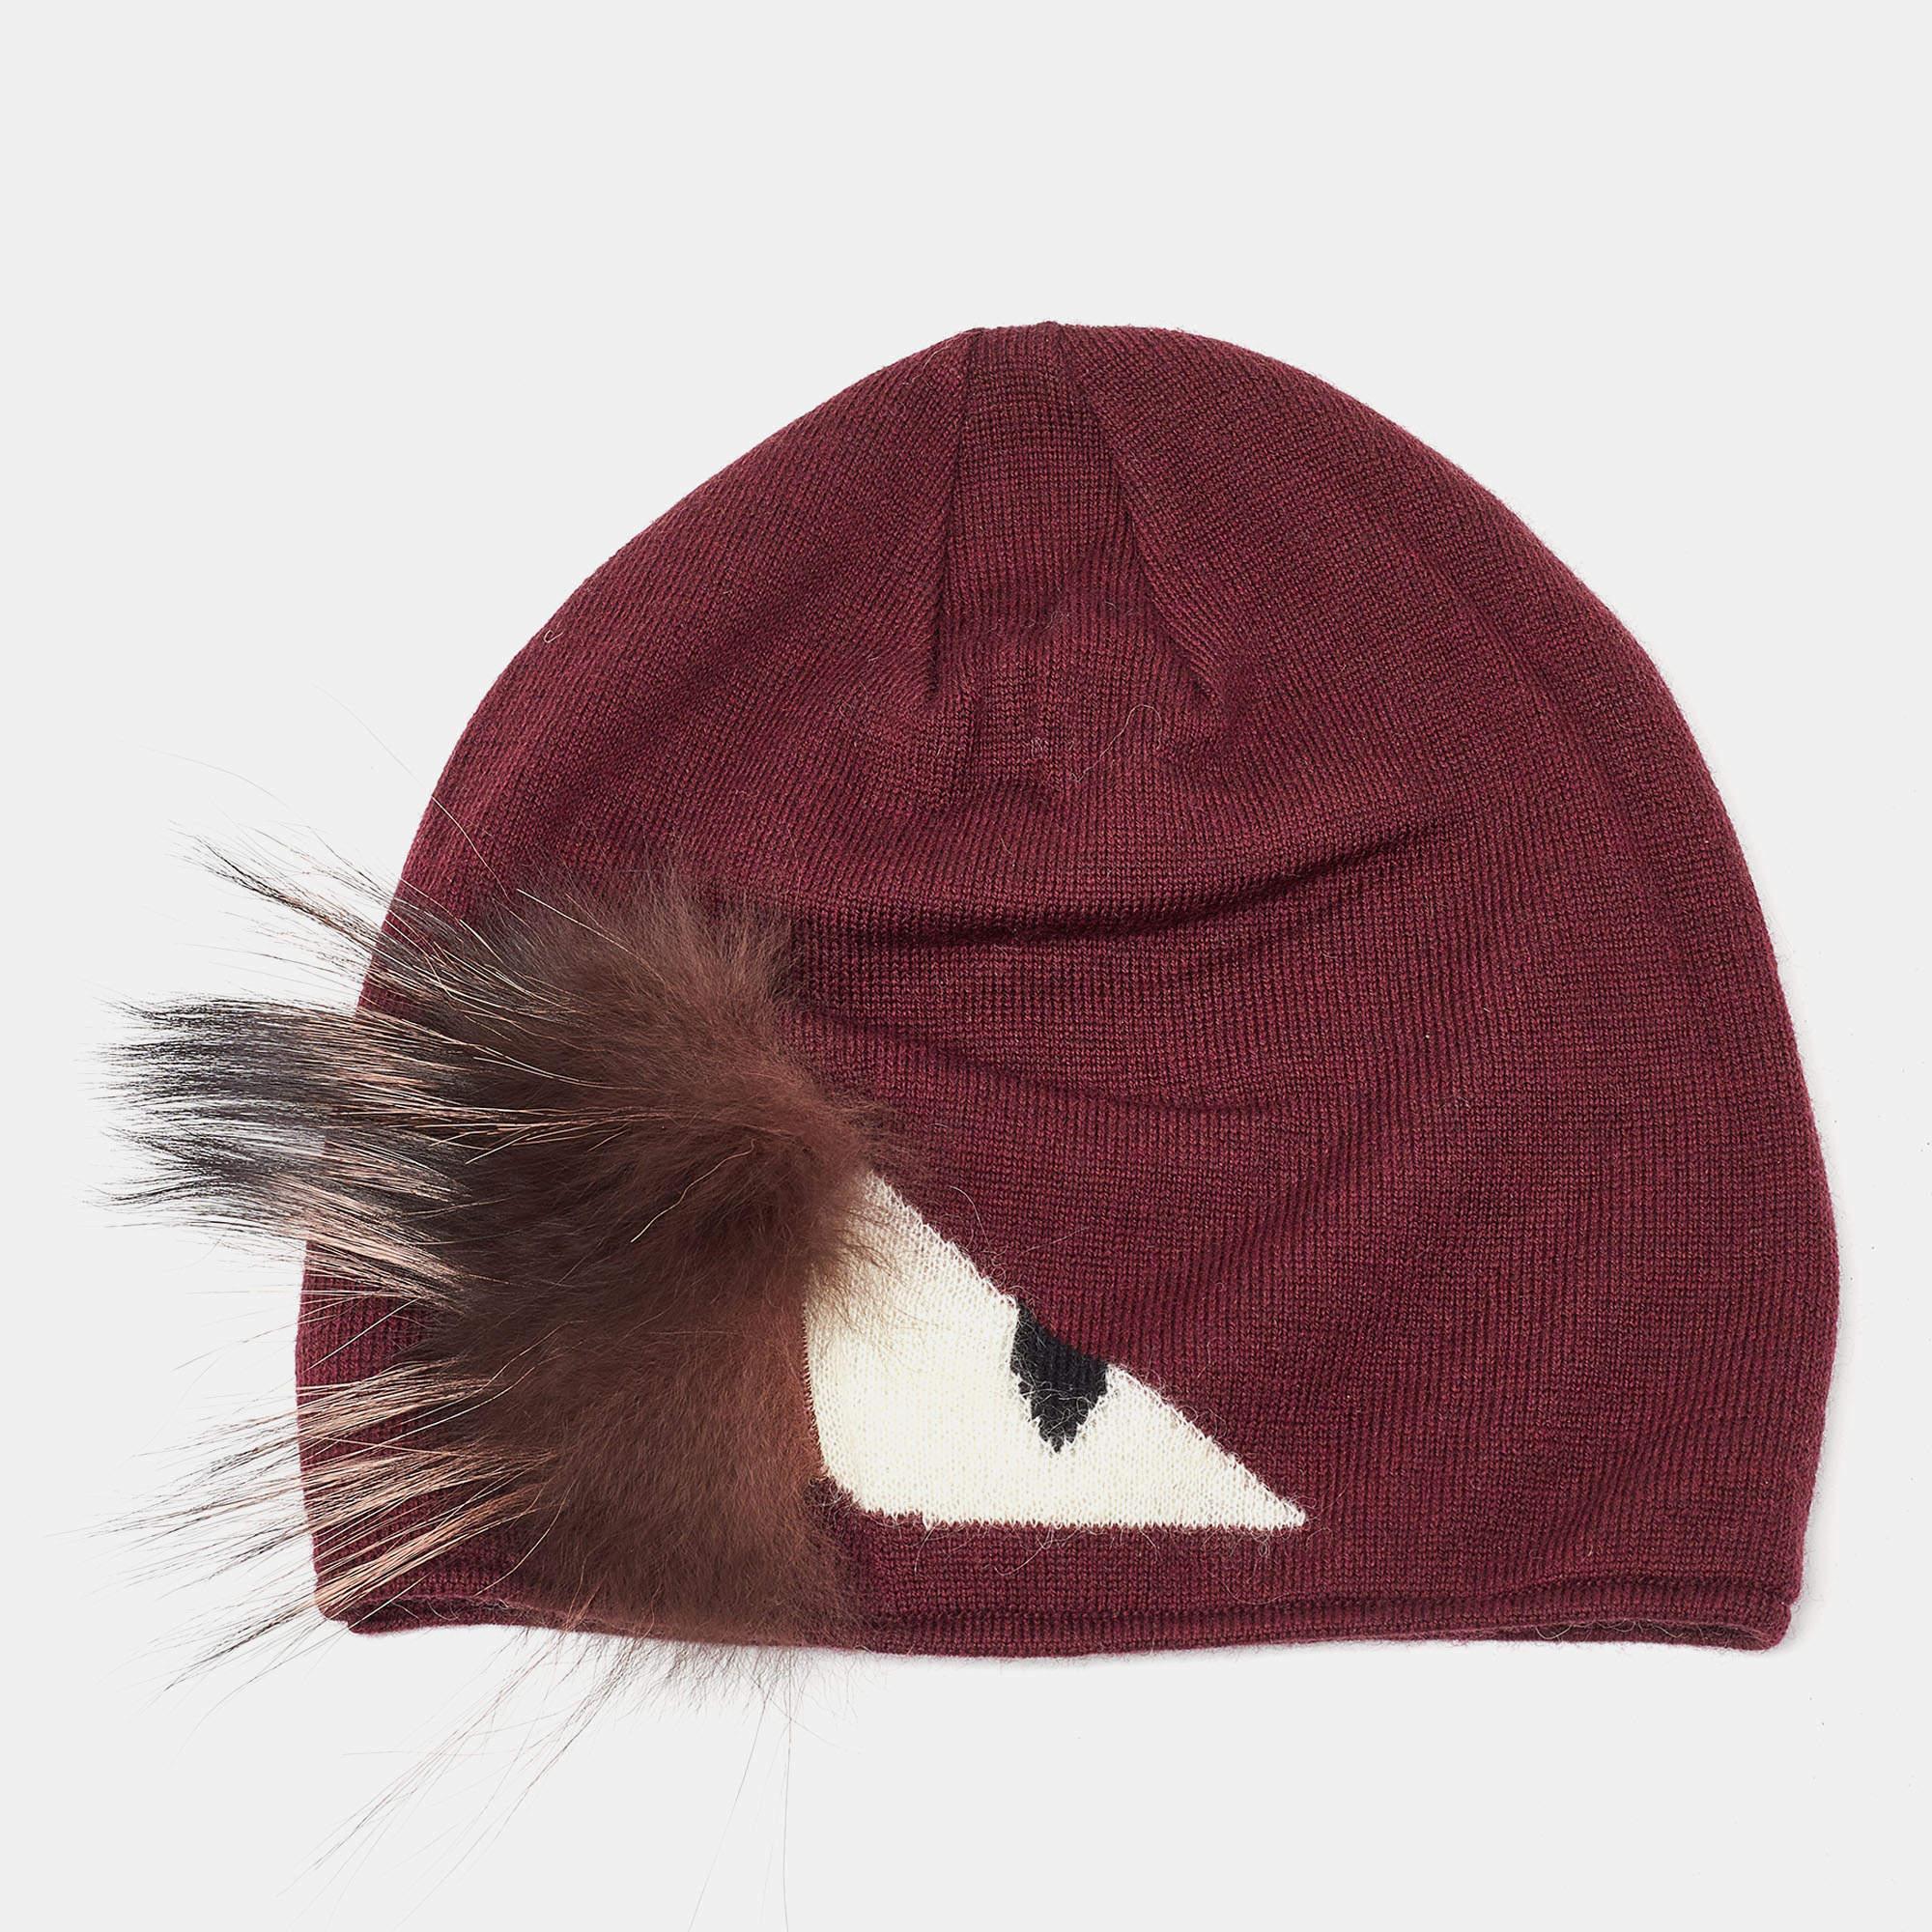 The Fendi beanie exudes luxury with its rich burgundy wool and playful Monster Eye fur embellishment. It combines warmth and style, making it a distinctive accessory for cold weather.

